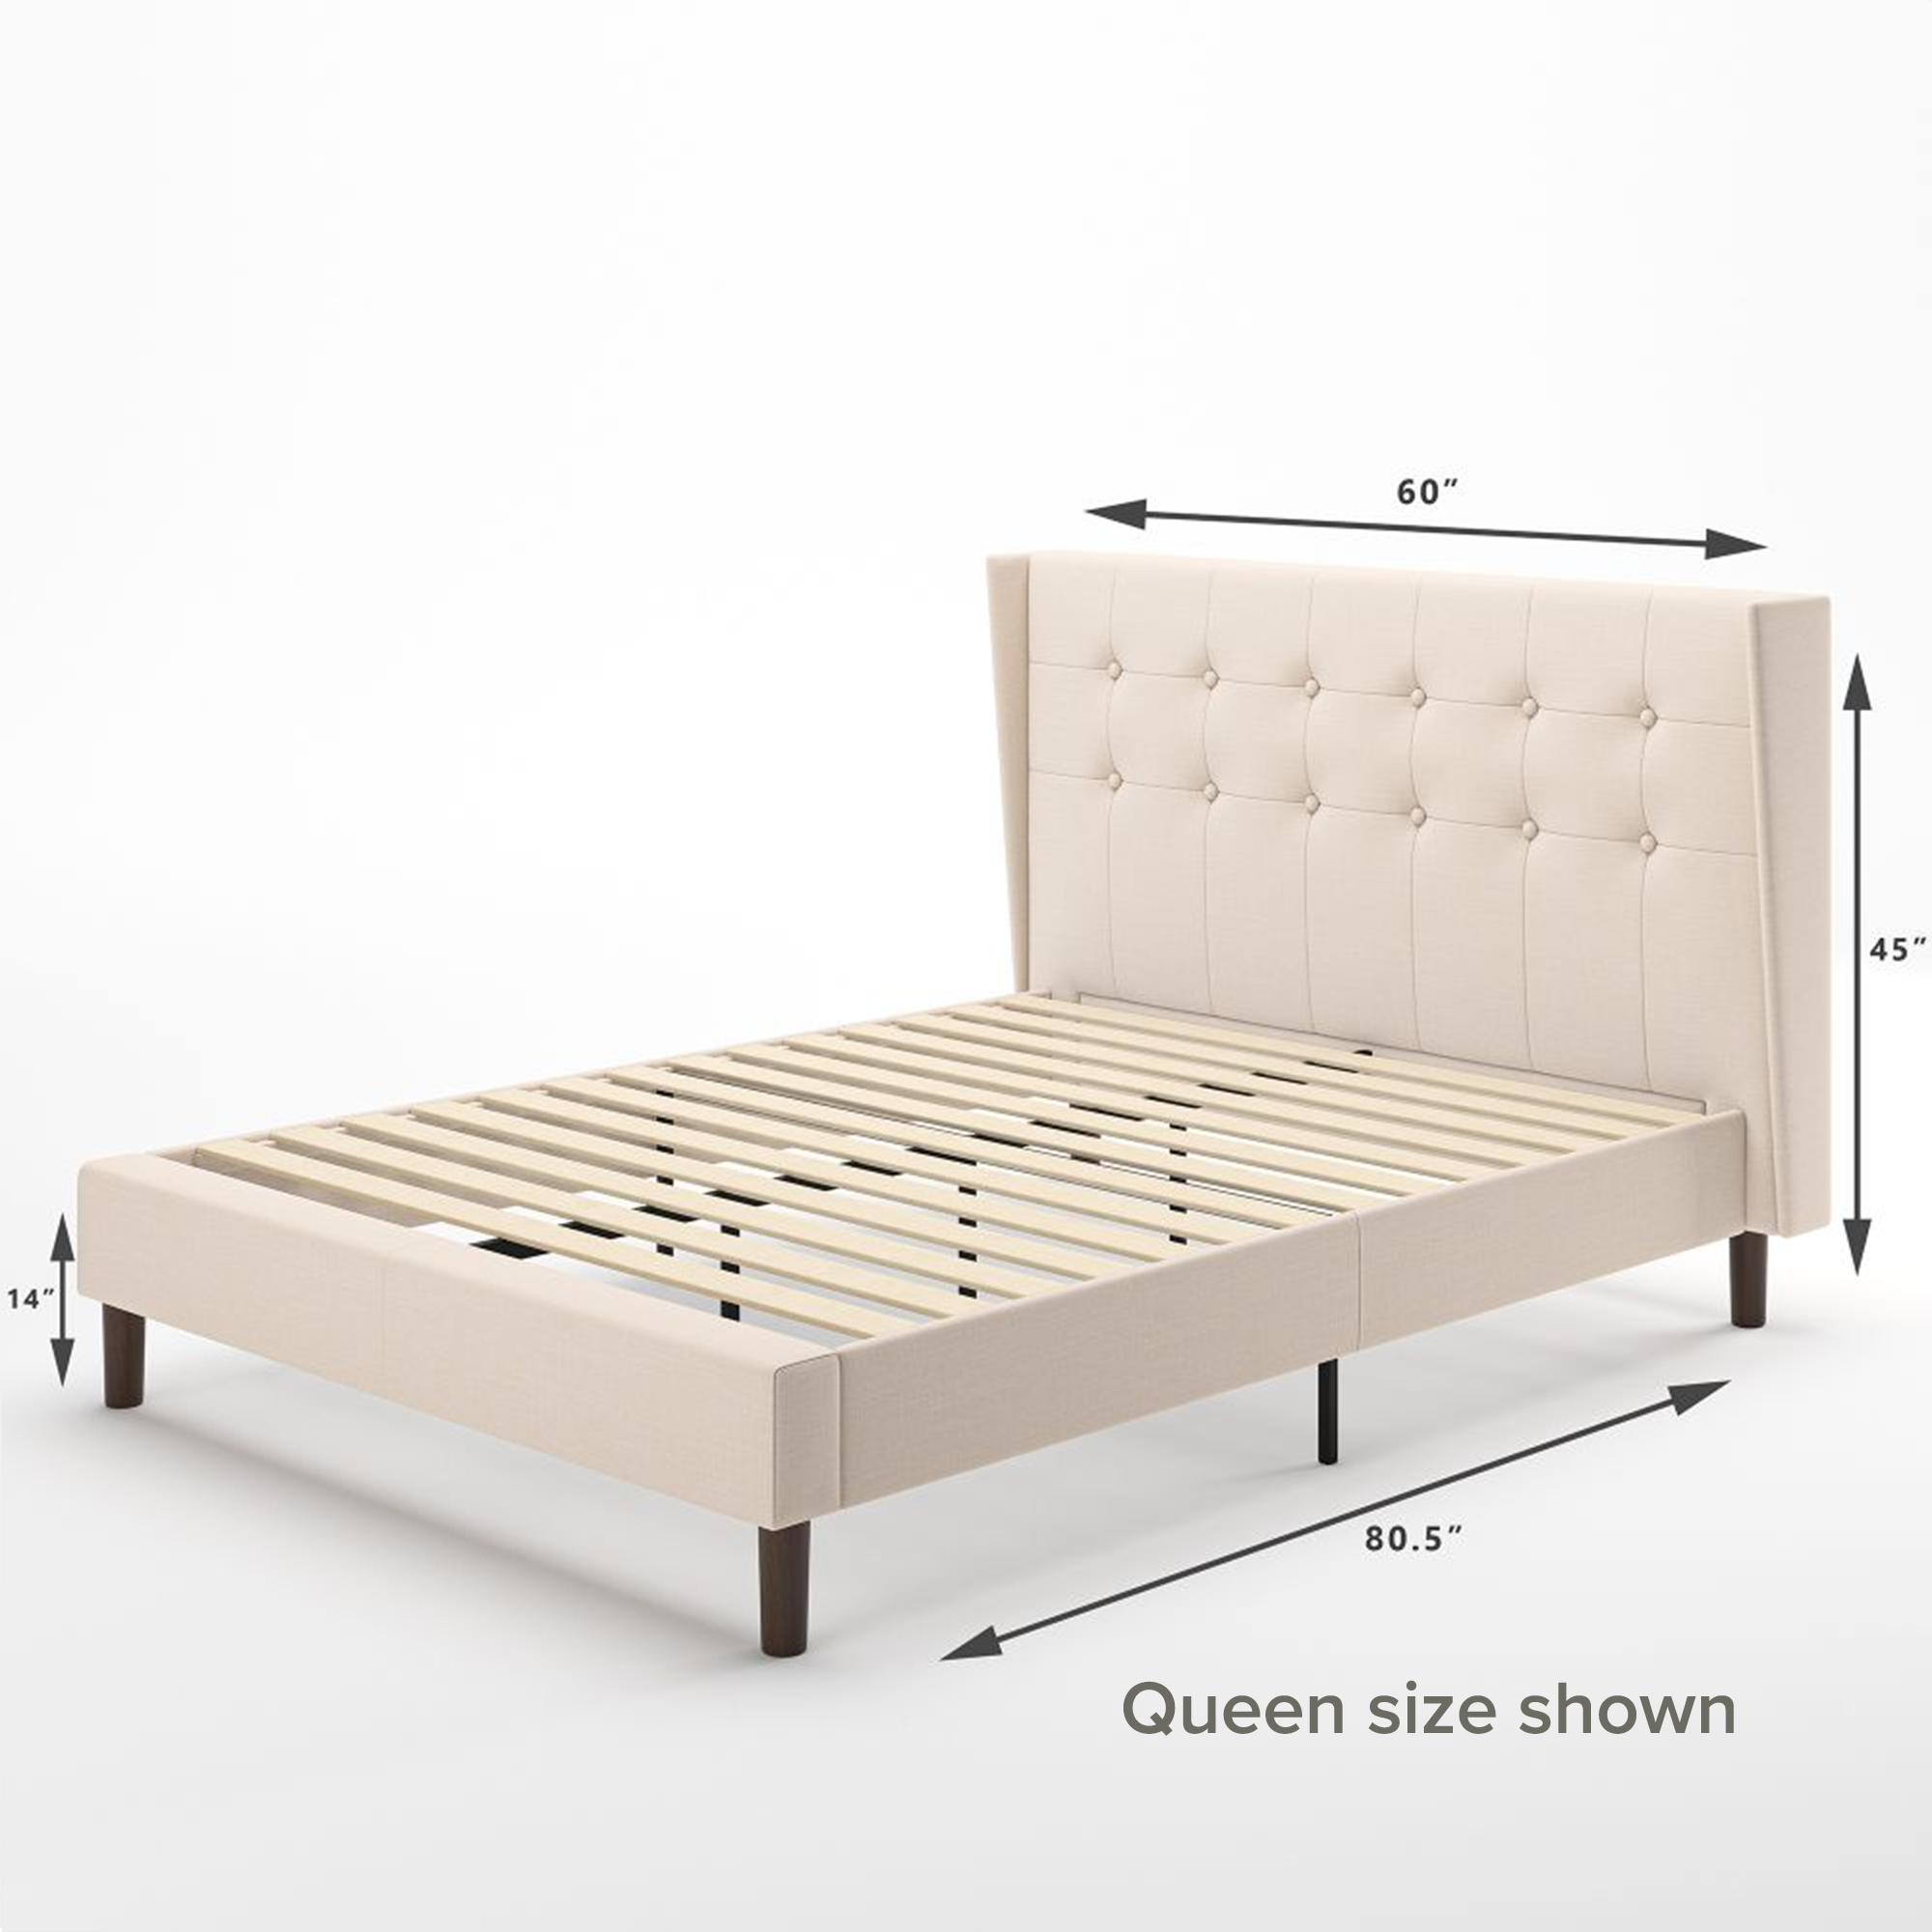 Athena upholstered platfrom bed frame queen size dimensions